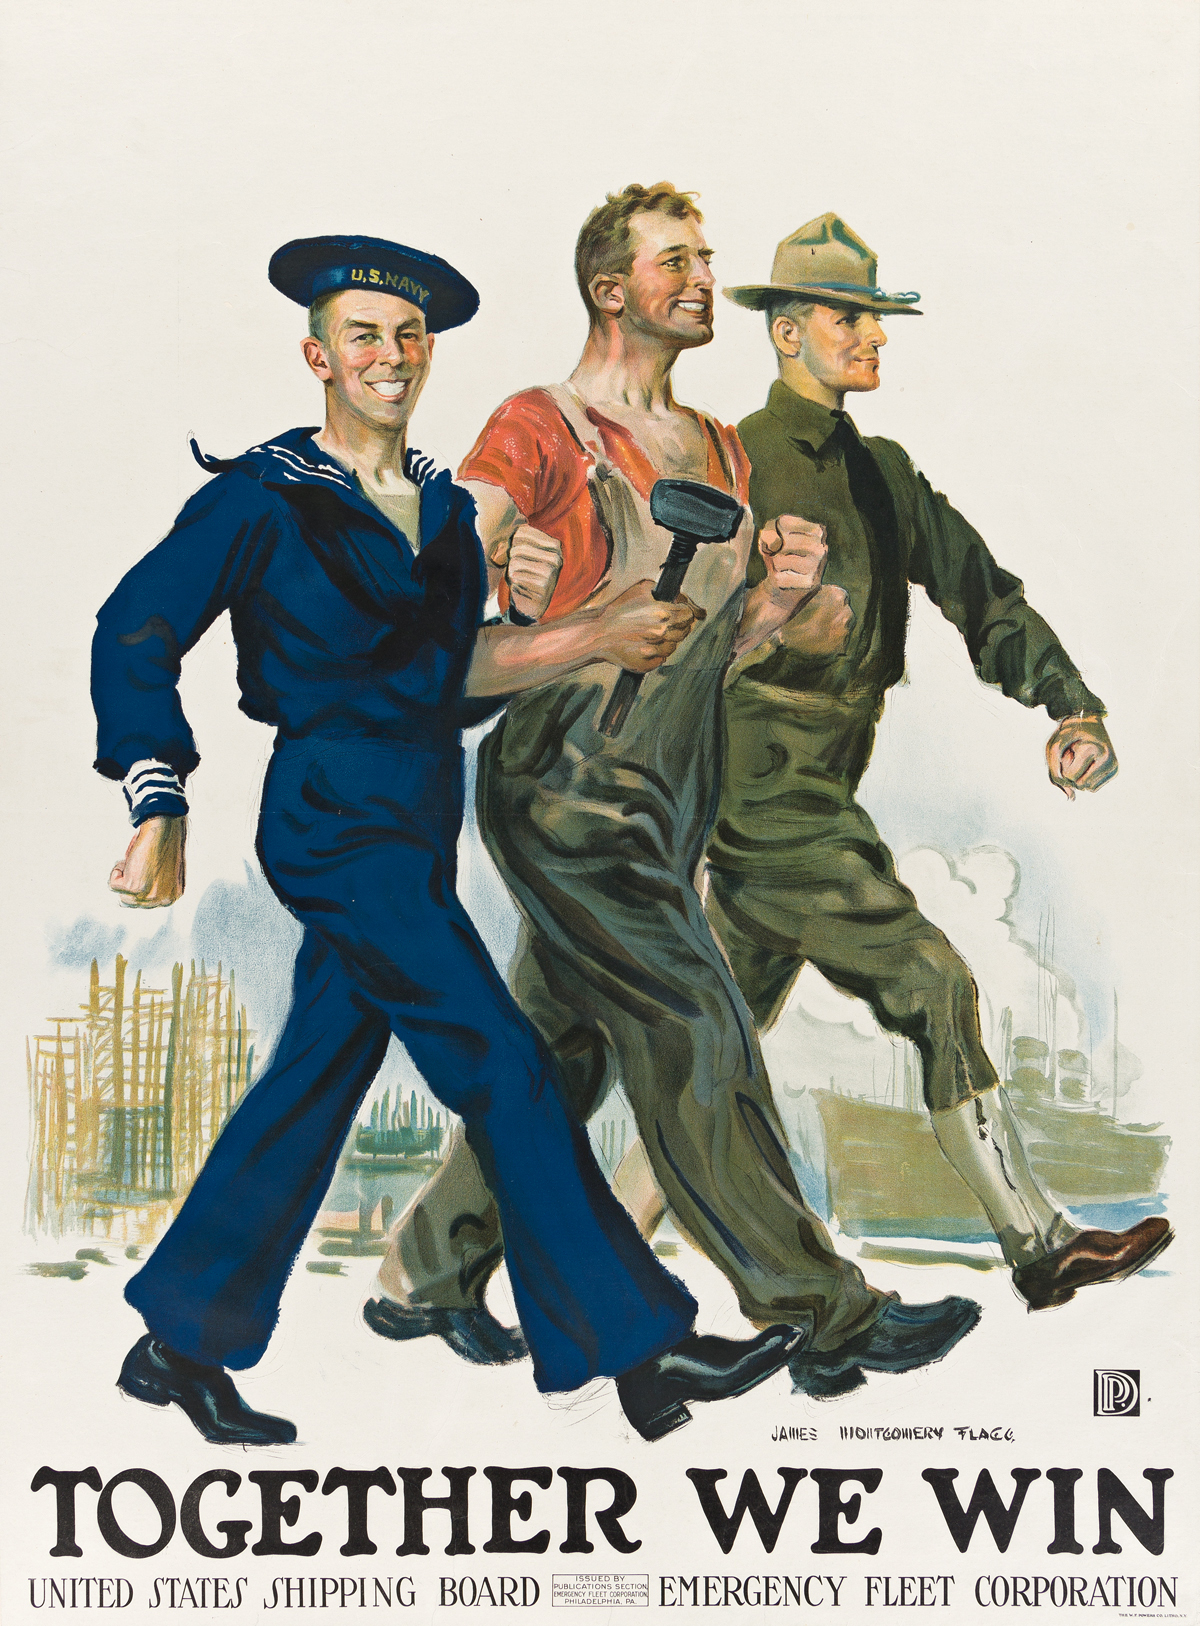 JAMES MONTGOMERY FLAGG (1870-1960).  TOGETHER WE WIN. Circa 1918. 39x29 inches, 99x73½ cm. The W.F. Powers Co. Litho, New York.